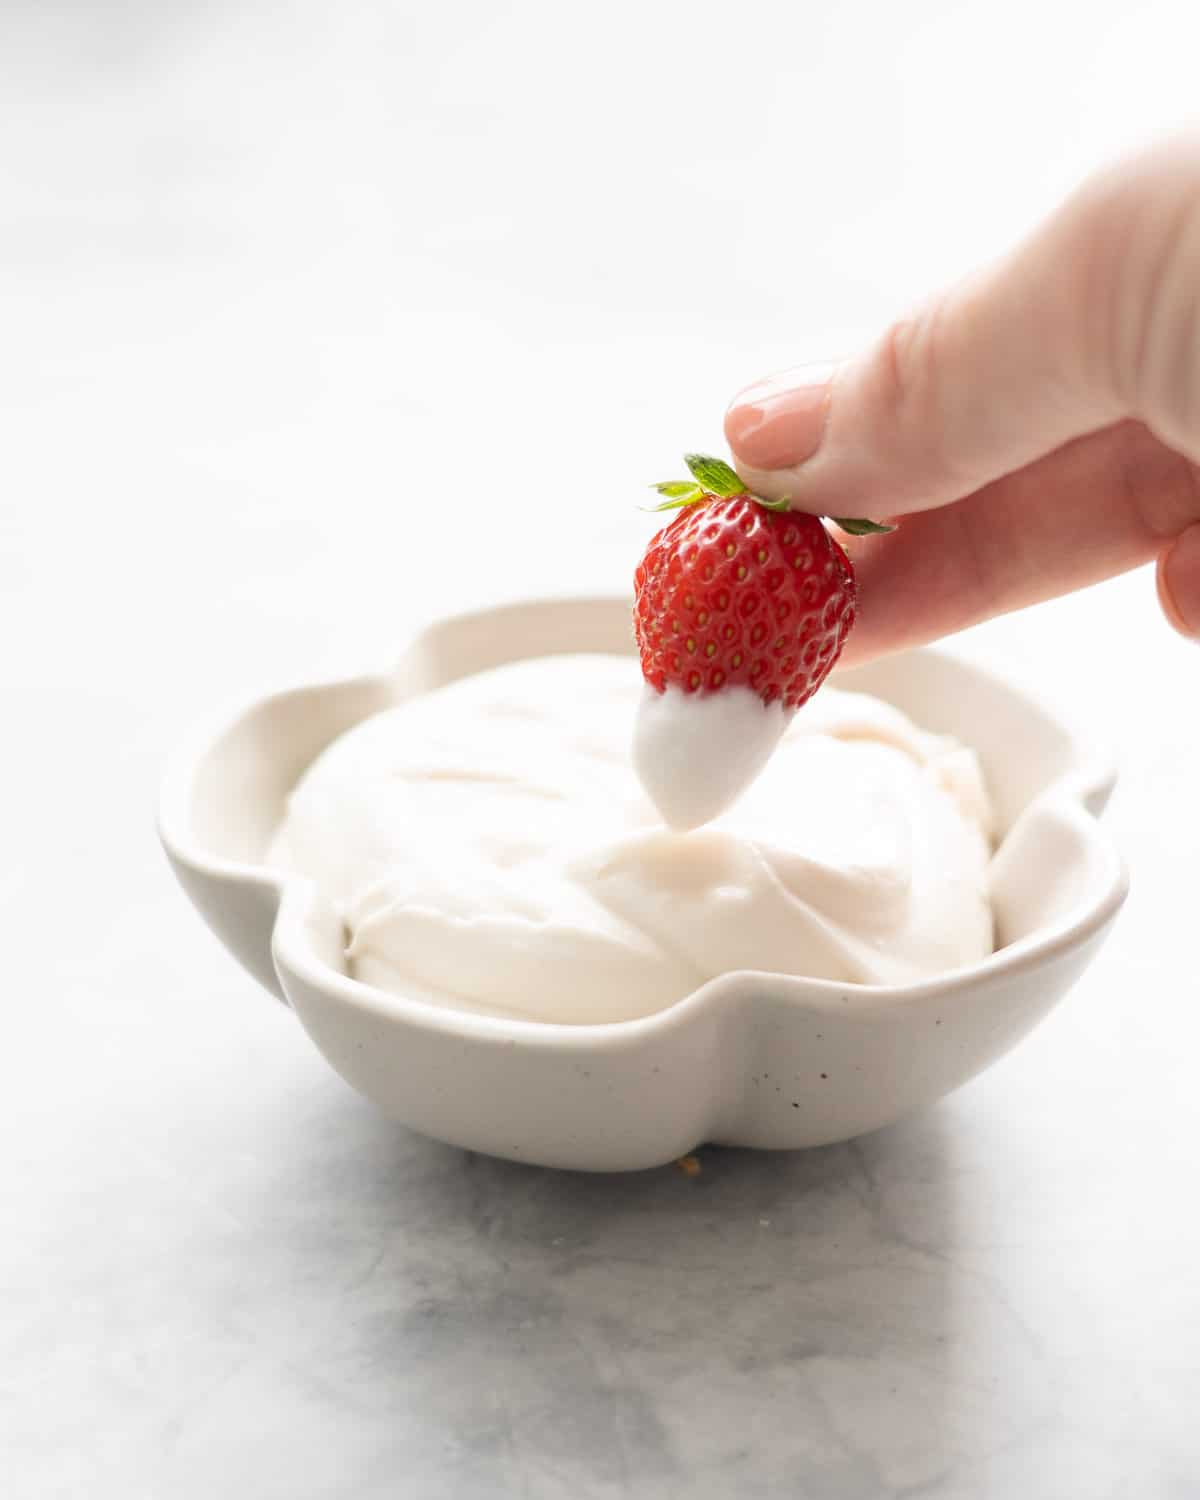 A strawberry being dipped into a small flower shaped bowl of whipped coconut cream